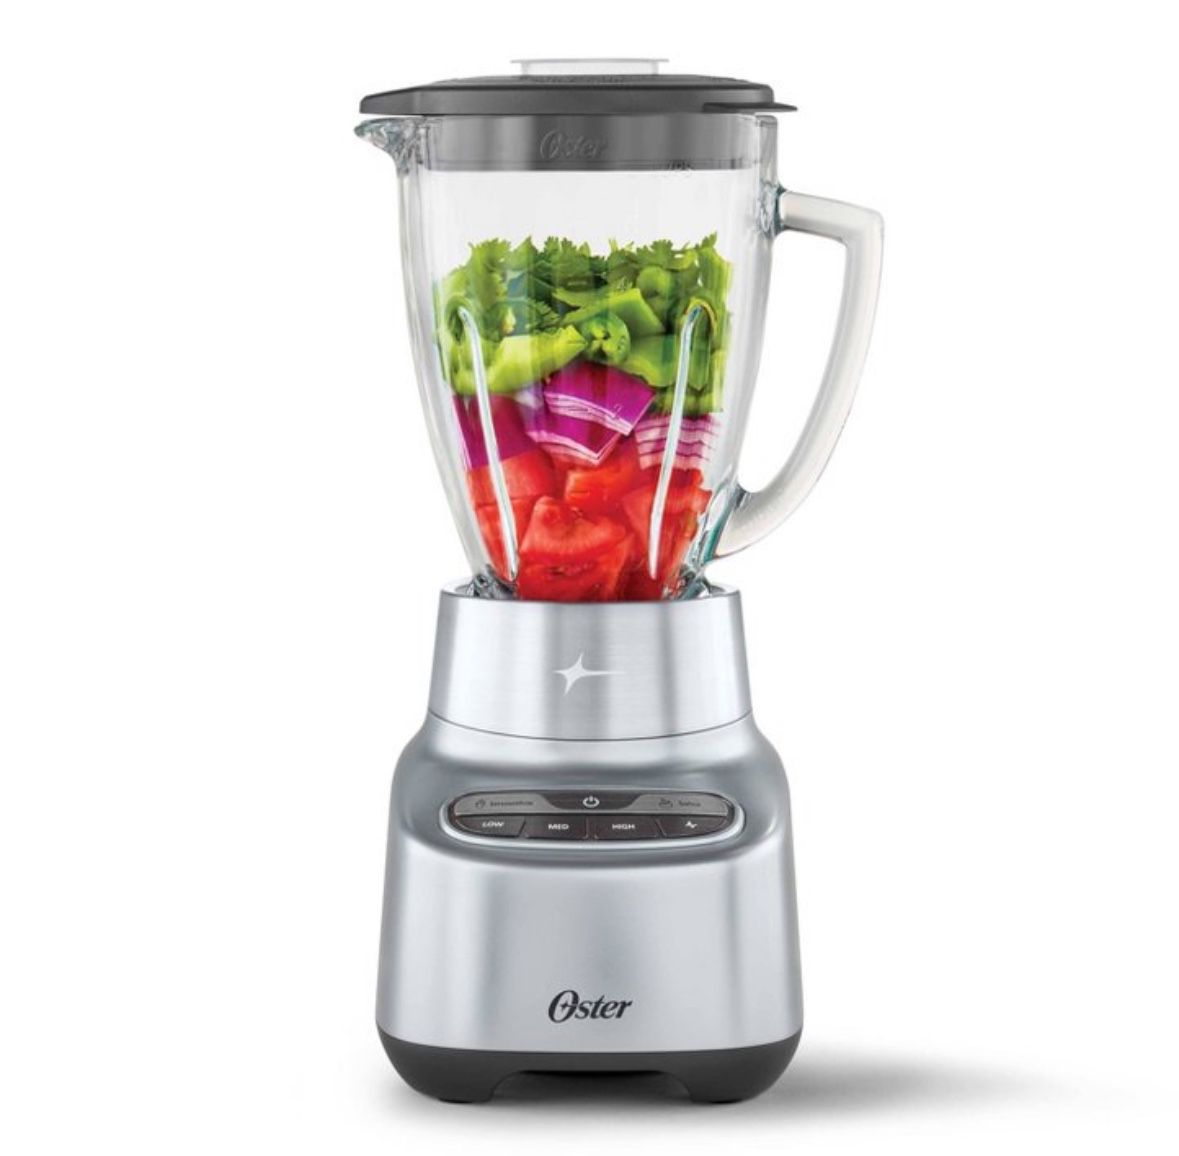 Oster® One-Touch Blender is perfect for creating your favorite smoothies, frozen drinks, salsas, and more. powerful 800-watt